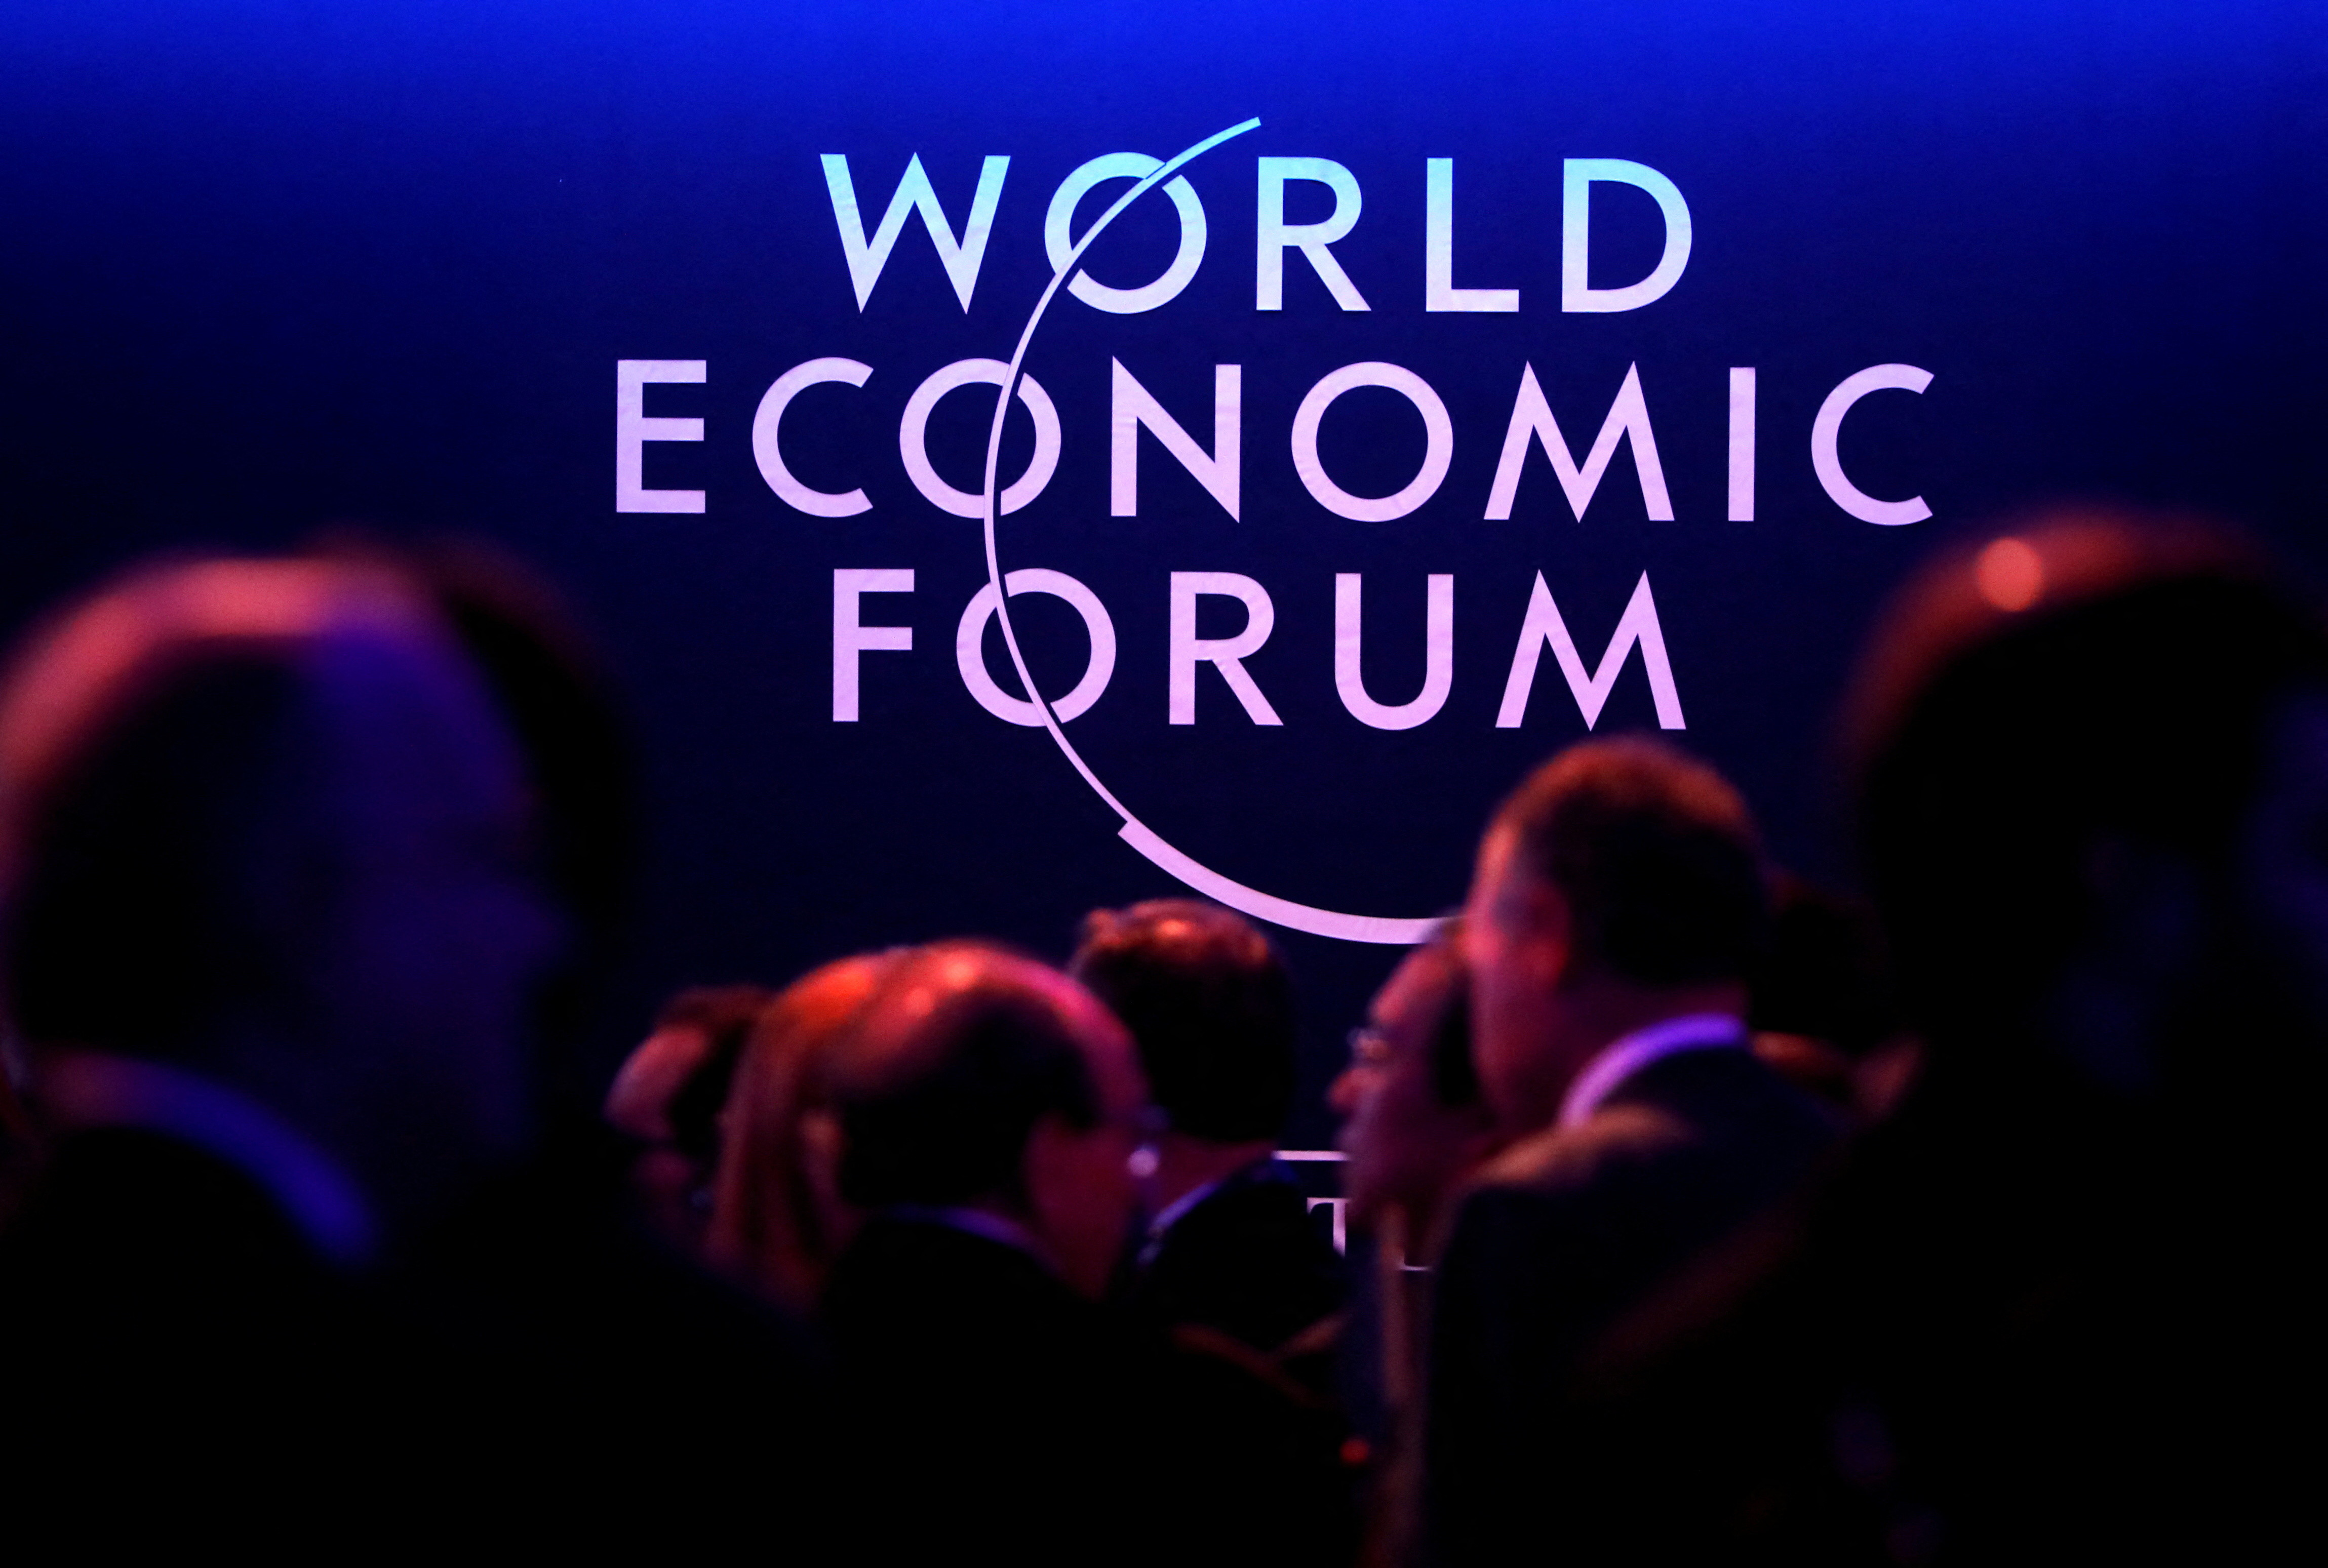 The World Economic Forum Has Been Taken Over By Crypto Firms Advocating Rapid Adoption.